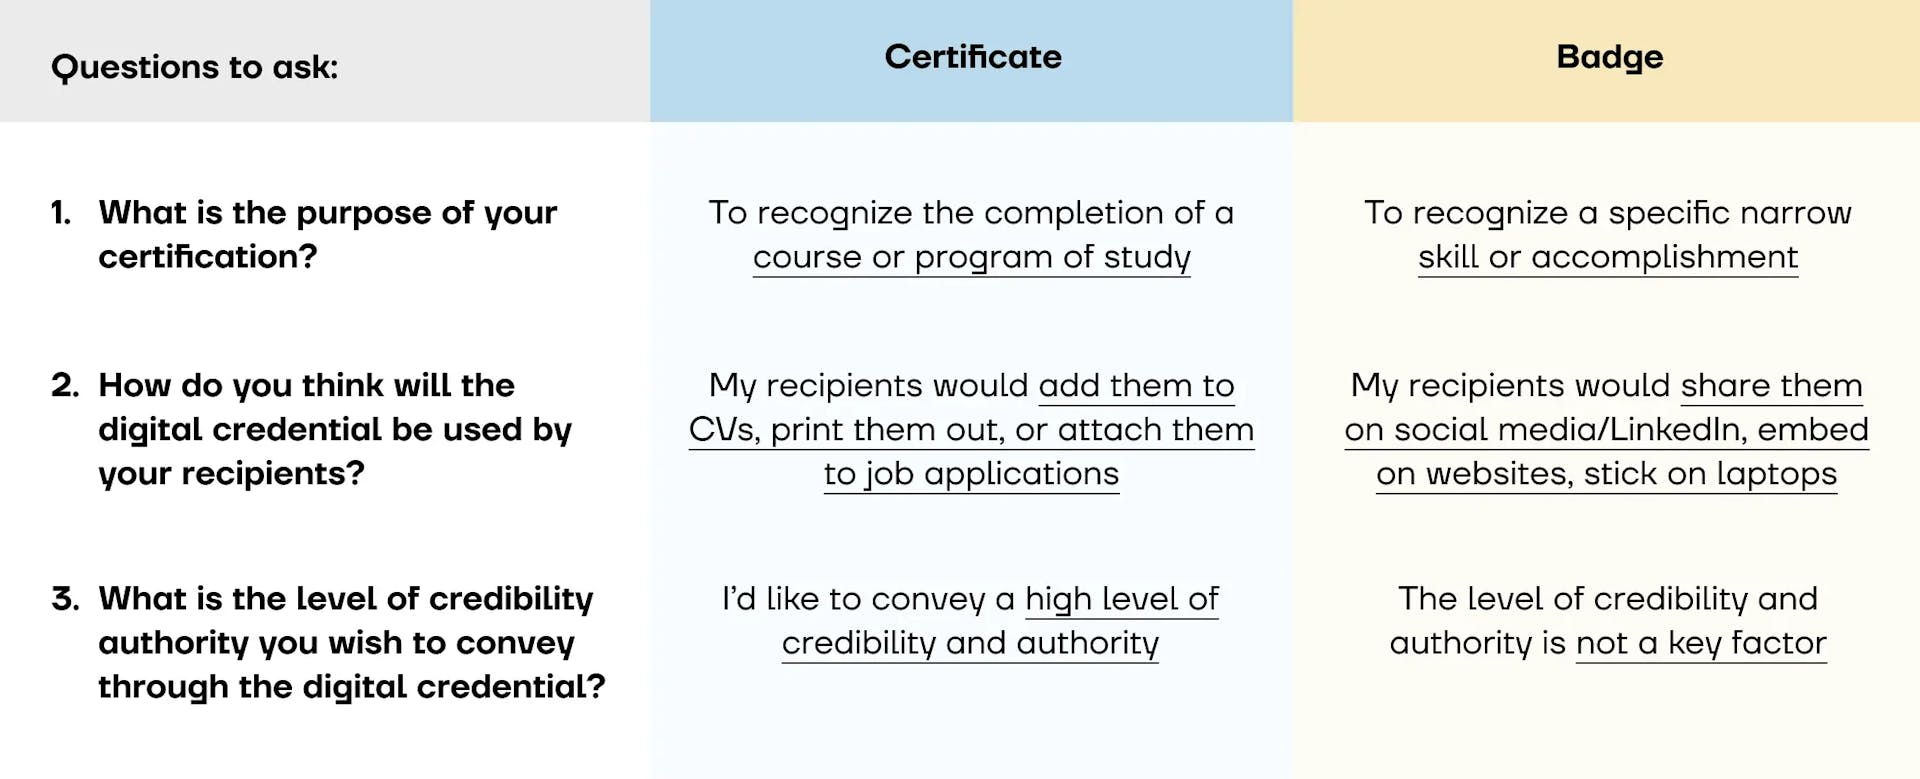 What to choose: certificate or badge